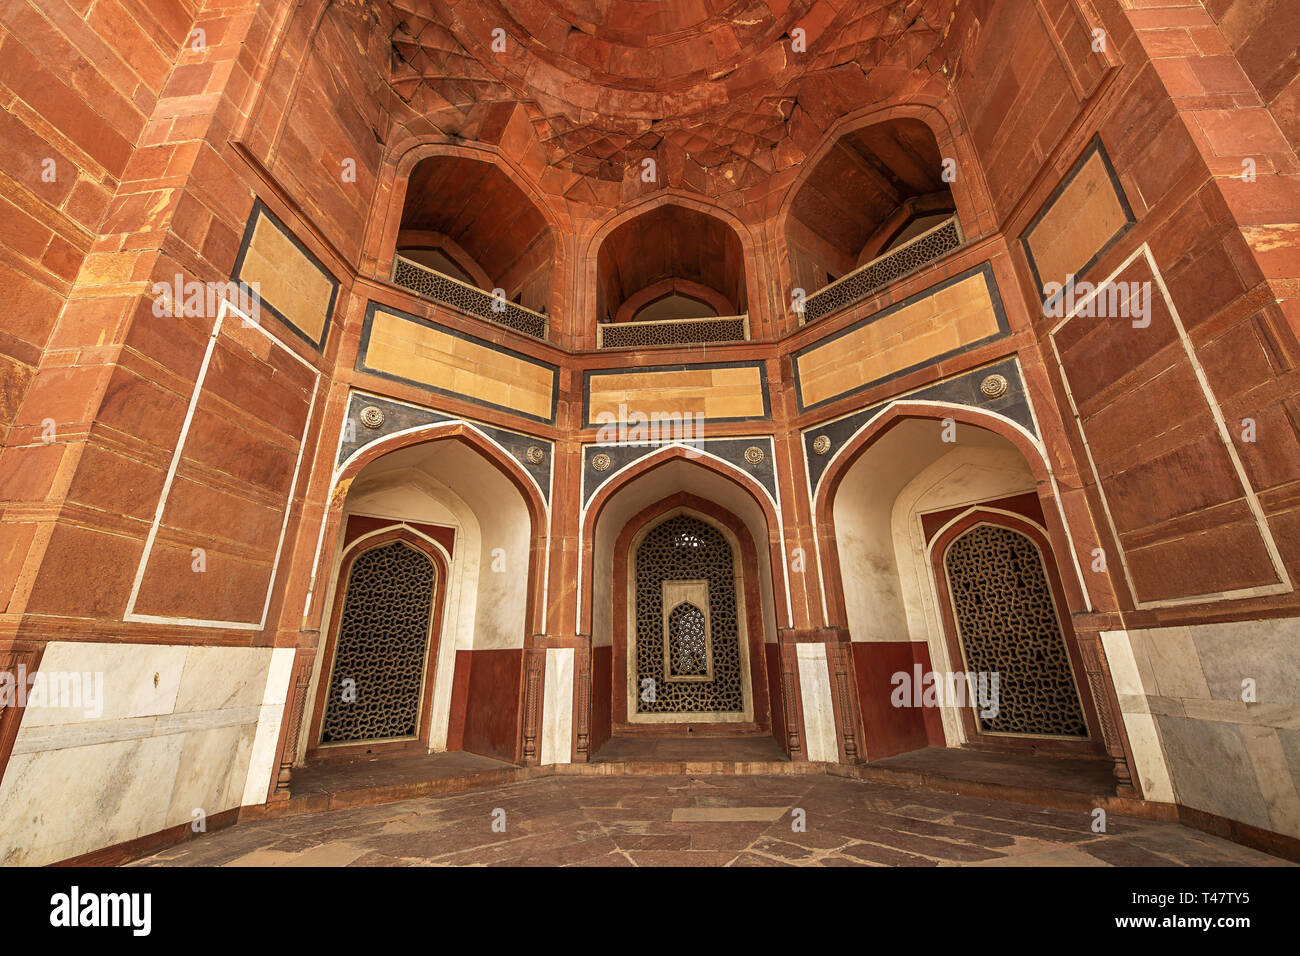 Humayun Tomb Delhi interior architecture made of marble and red sandstone. Humayun Tomb is a UNESCO World Heritage site. Stock Photo